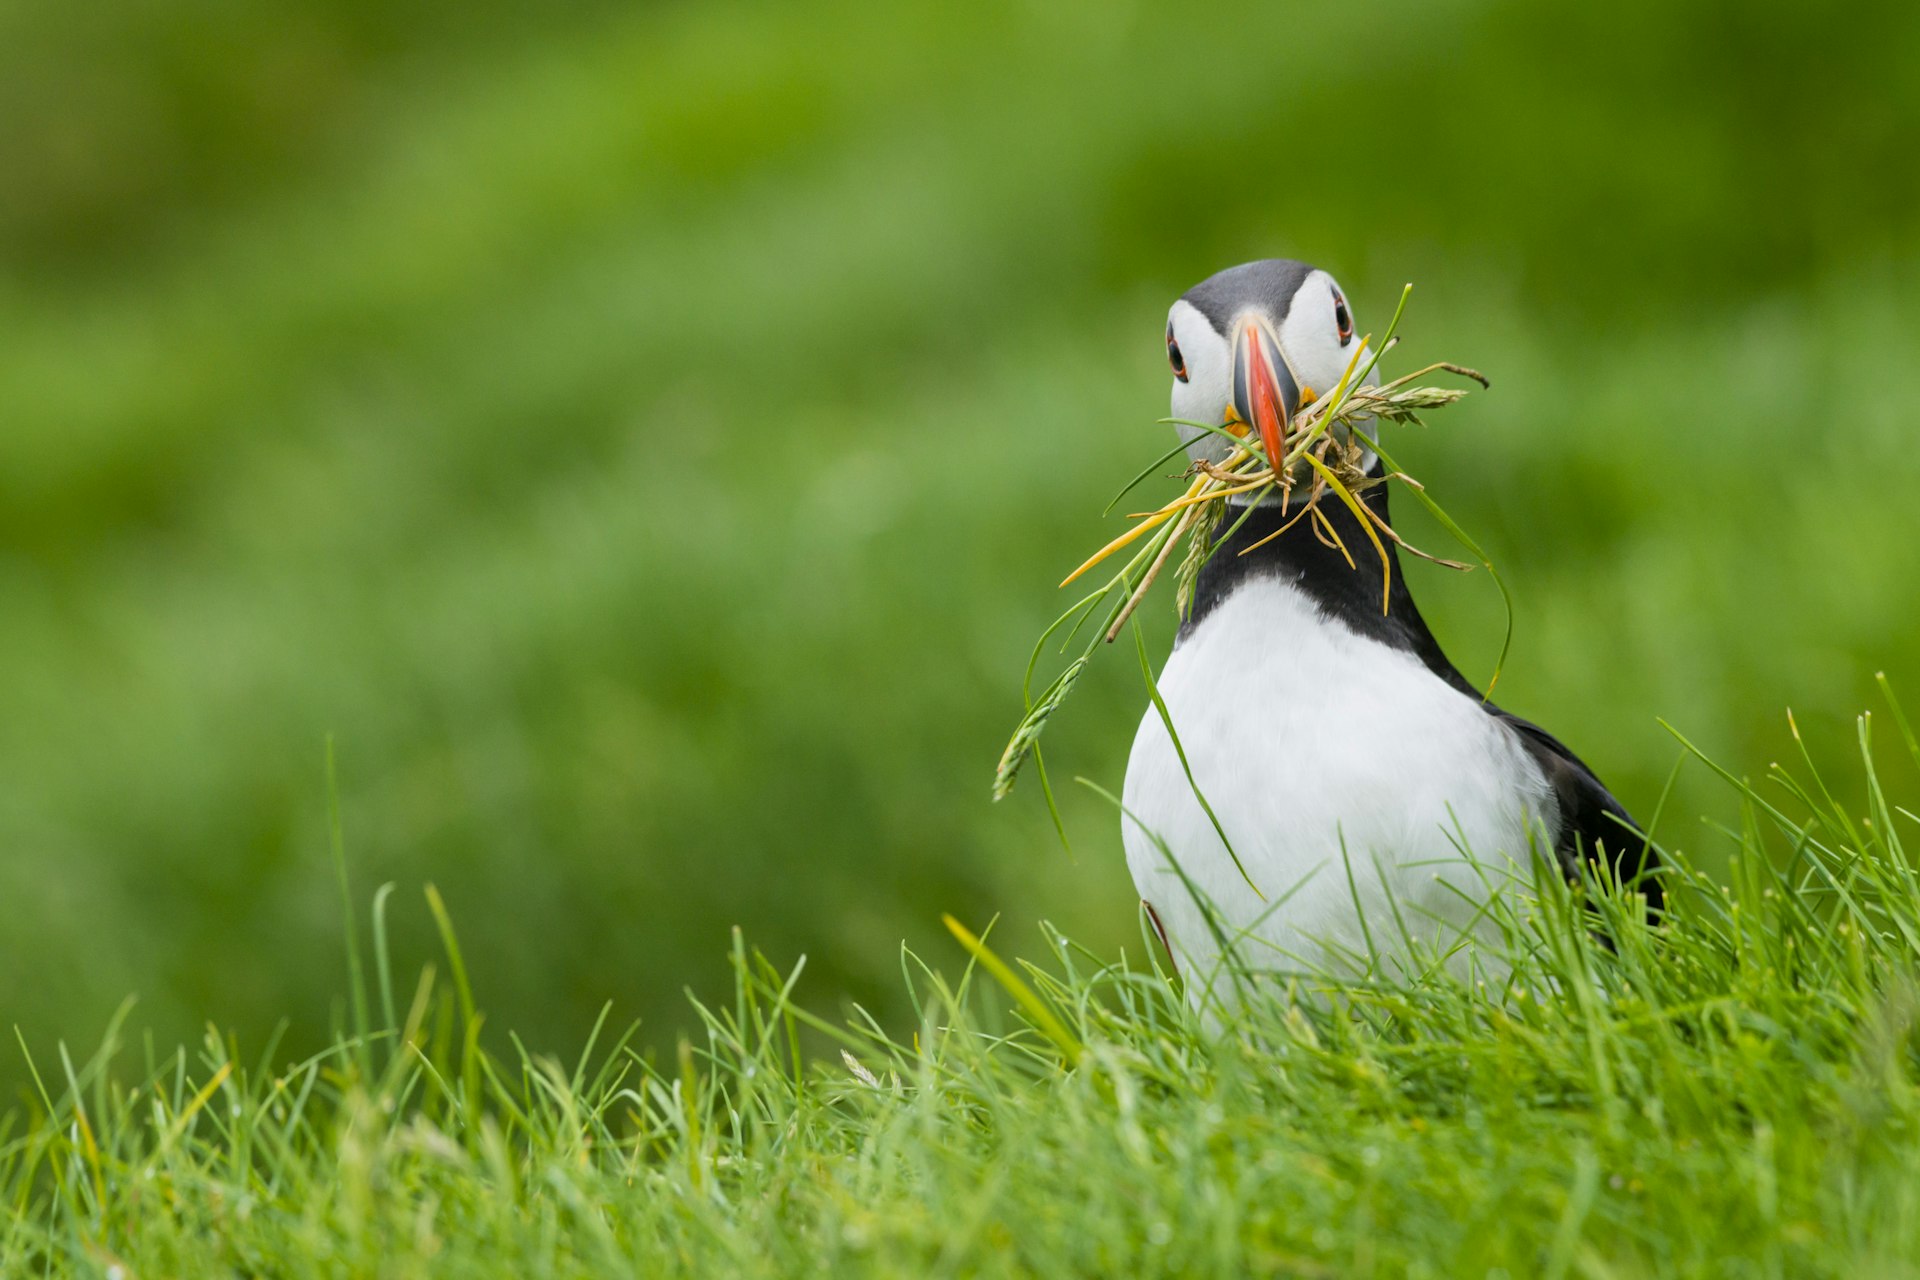 A puffin holding a tuft of grass in its beak, in a bright green landscape.